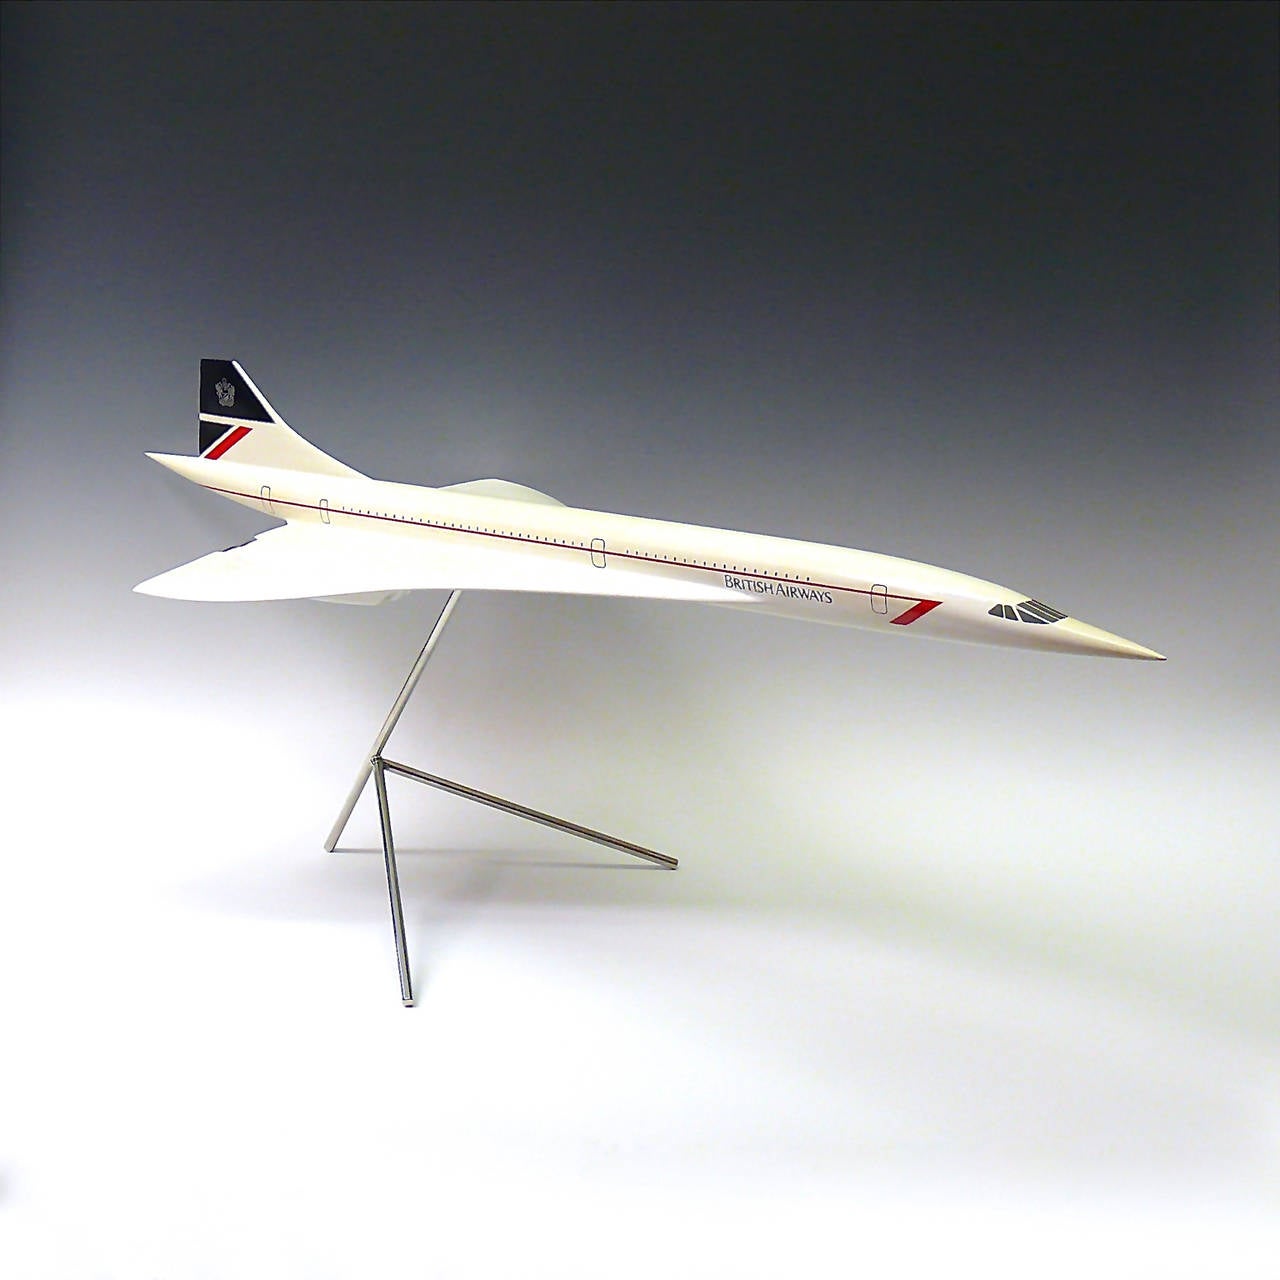 An original vintage Concorde fiberglass and plastic composite 1:72 scale model. In full British Airways livery, mounted on metal stand,
circa 1985.

Dimensions: 85 cm (length) x 35 cm (wing span) x 36 cm (height on stand to top of tail